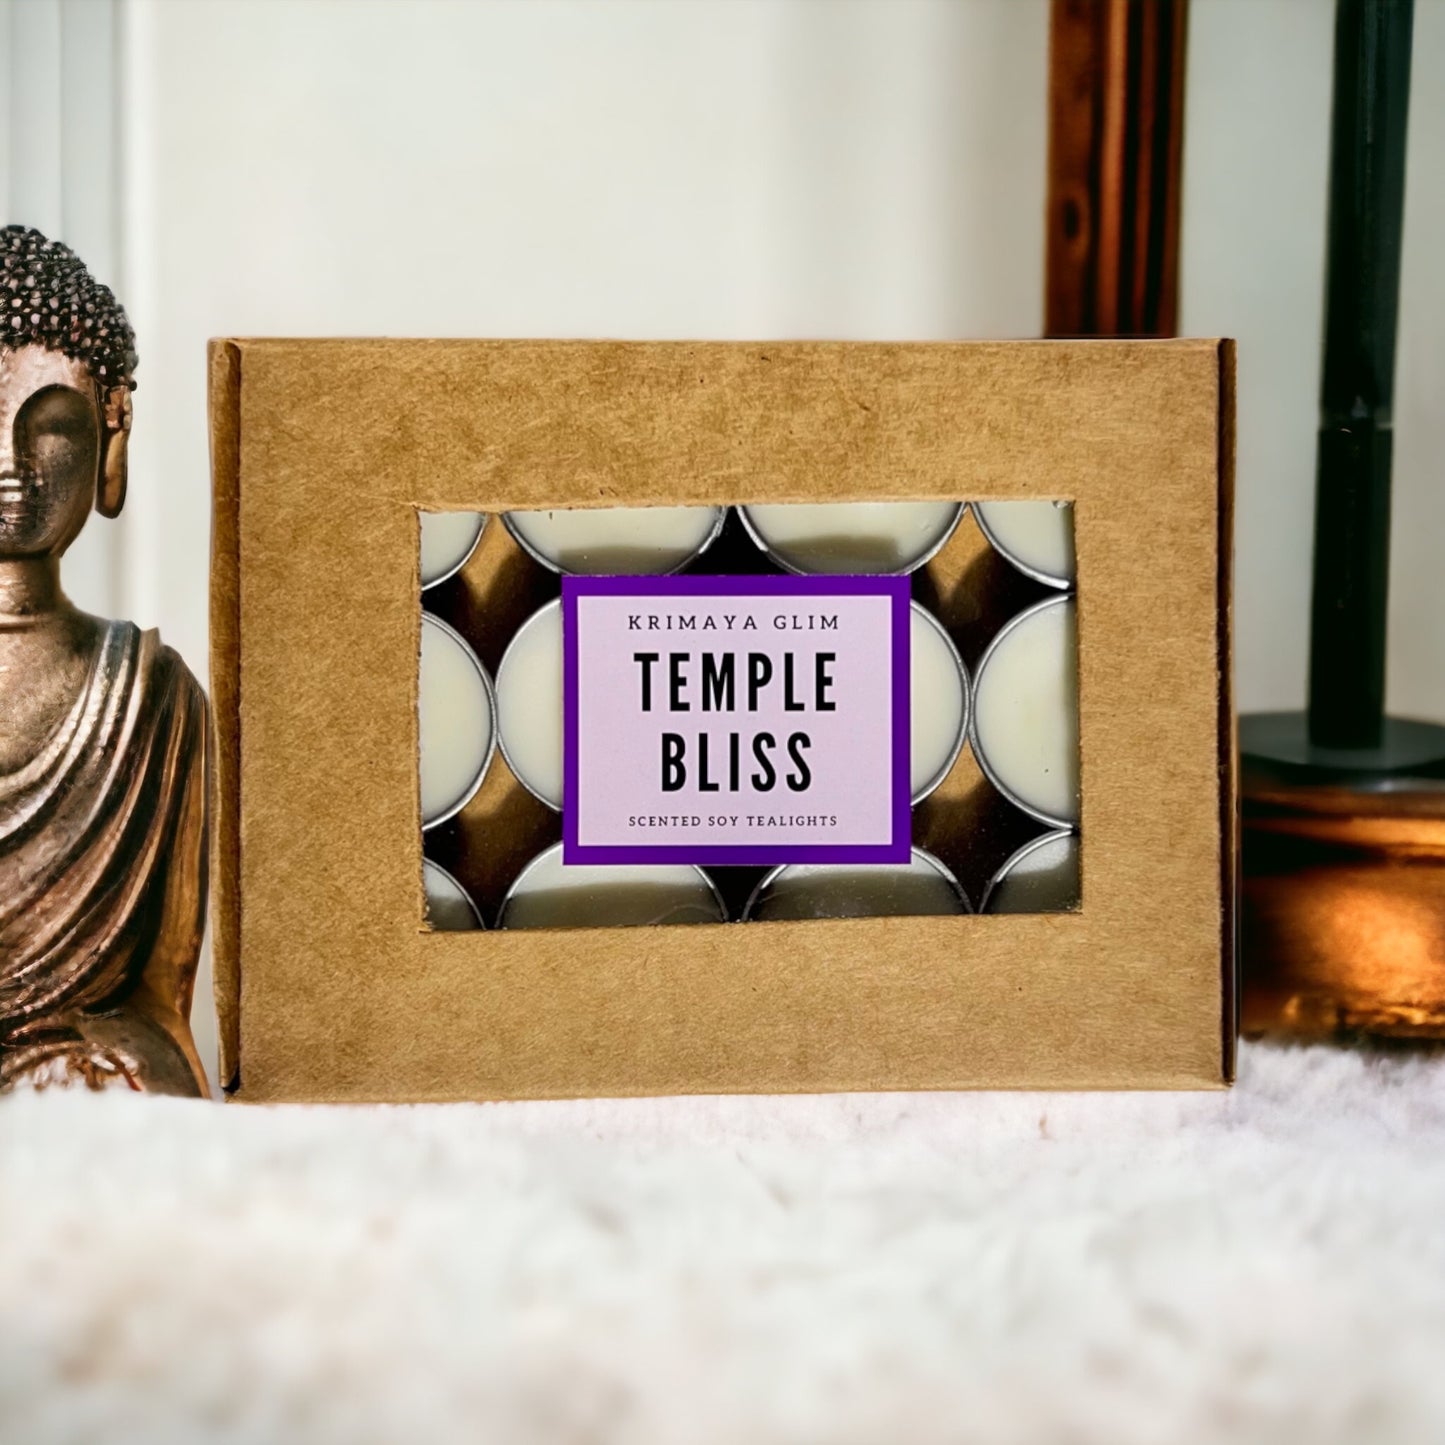 TEMPLE BLISS SOY TEALIGHTS